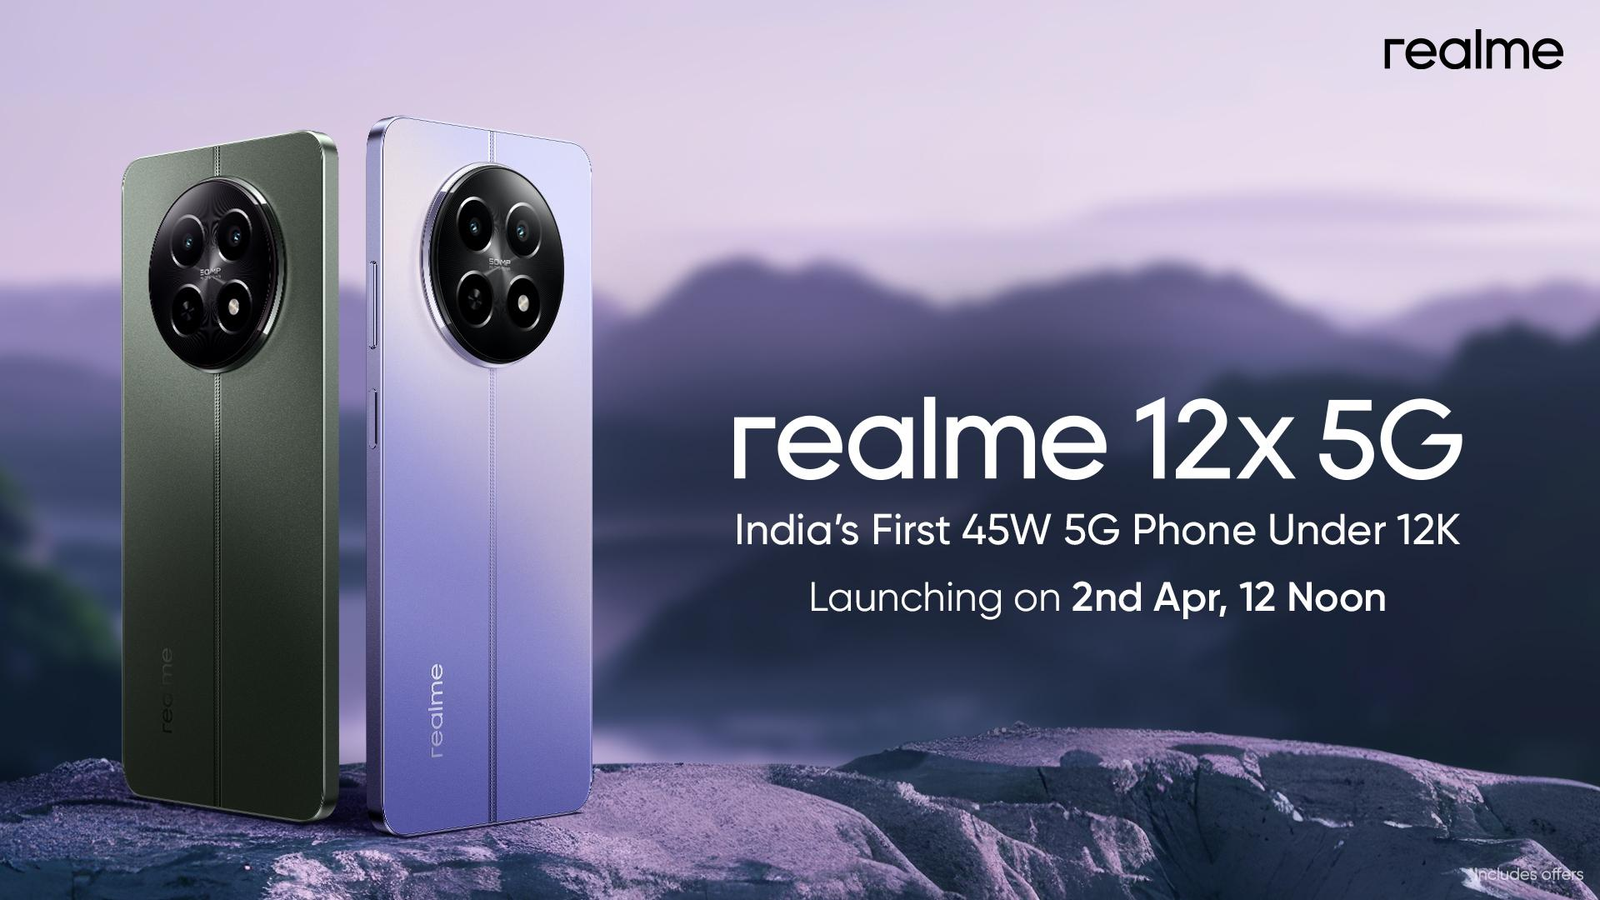 Realme 12x 5G A New Affordable 5G Phone Hits the Market